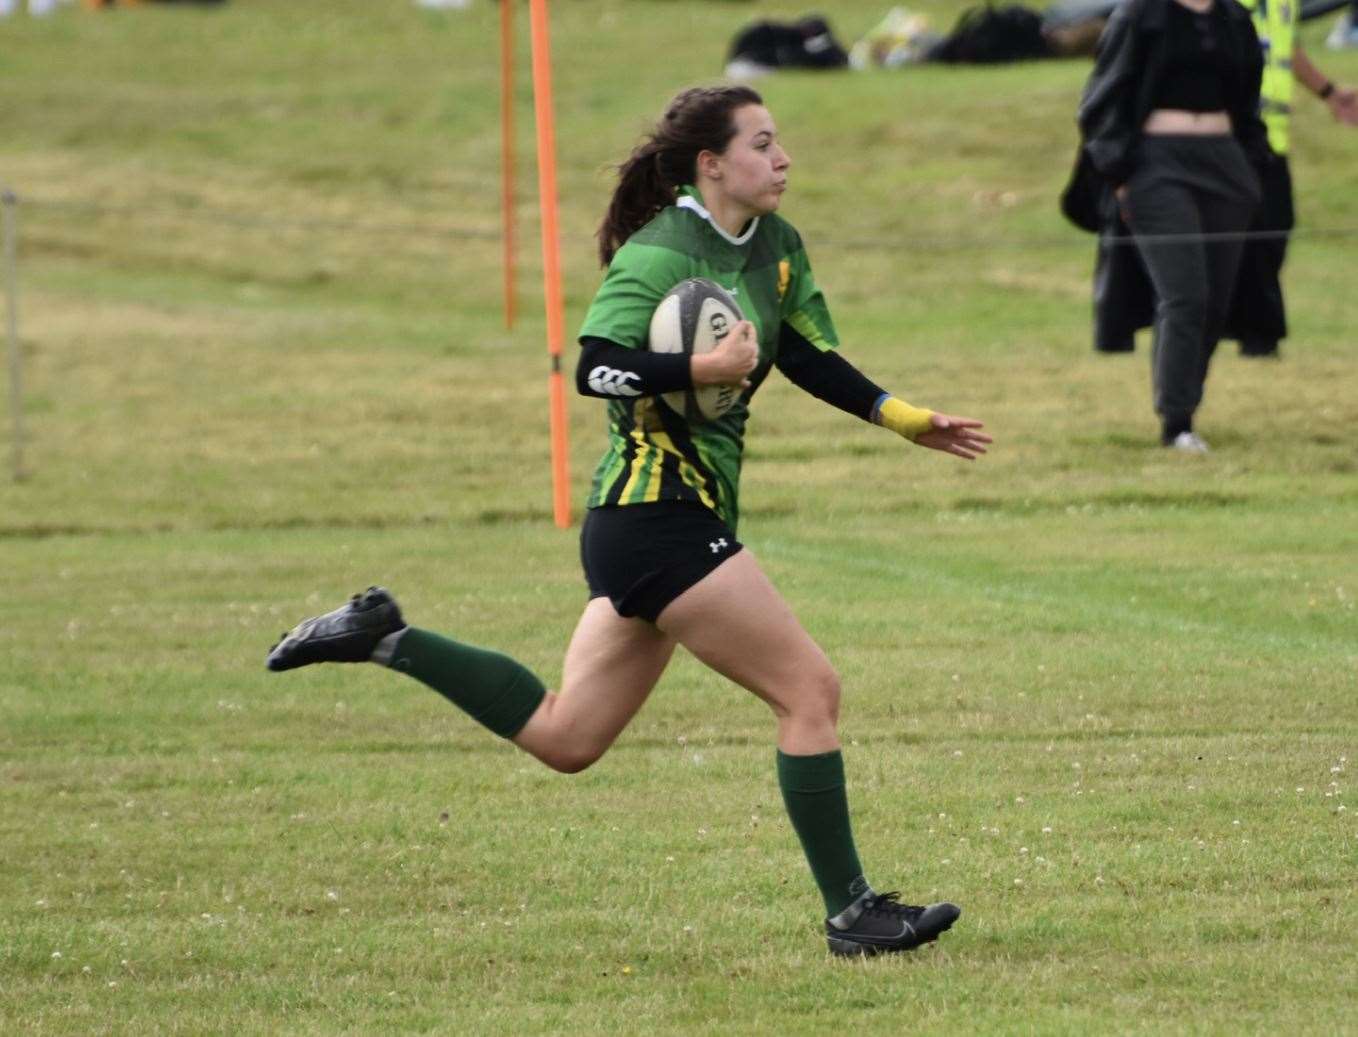 Morven Thomson, who plays fly-half and centre, will be heading to the national sports training centre at Inverclyde as part of the Scottish under-18s.